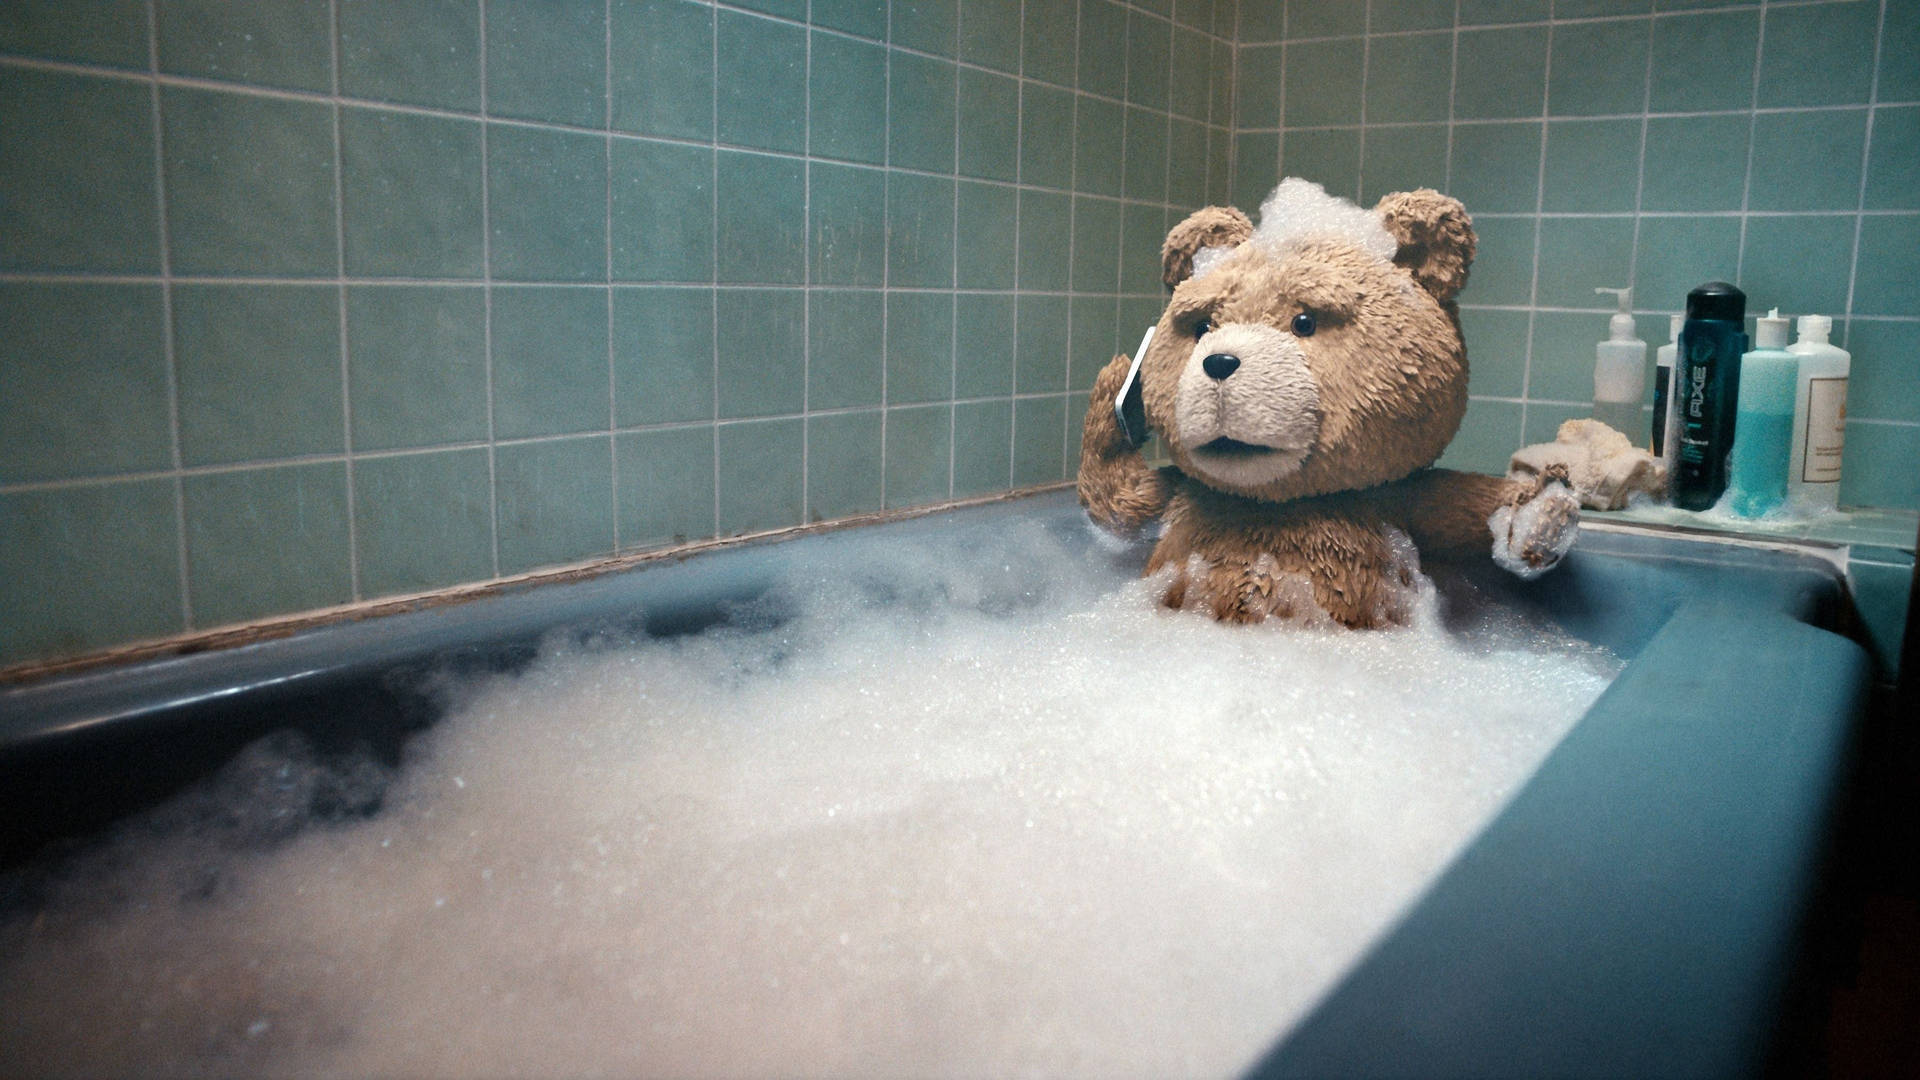 Ted Soaking In A Hot Bath Filled With Bubbles Background